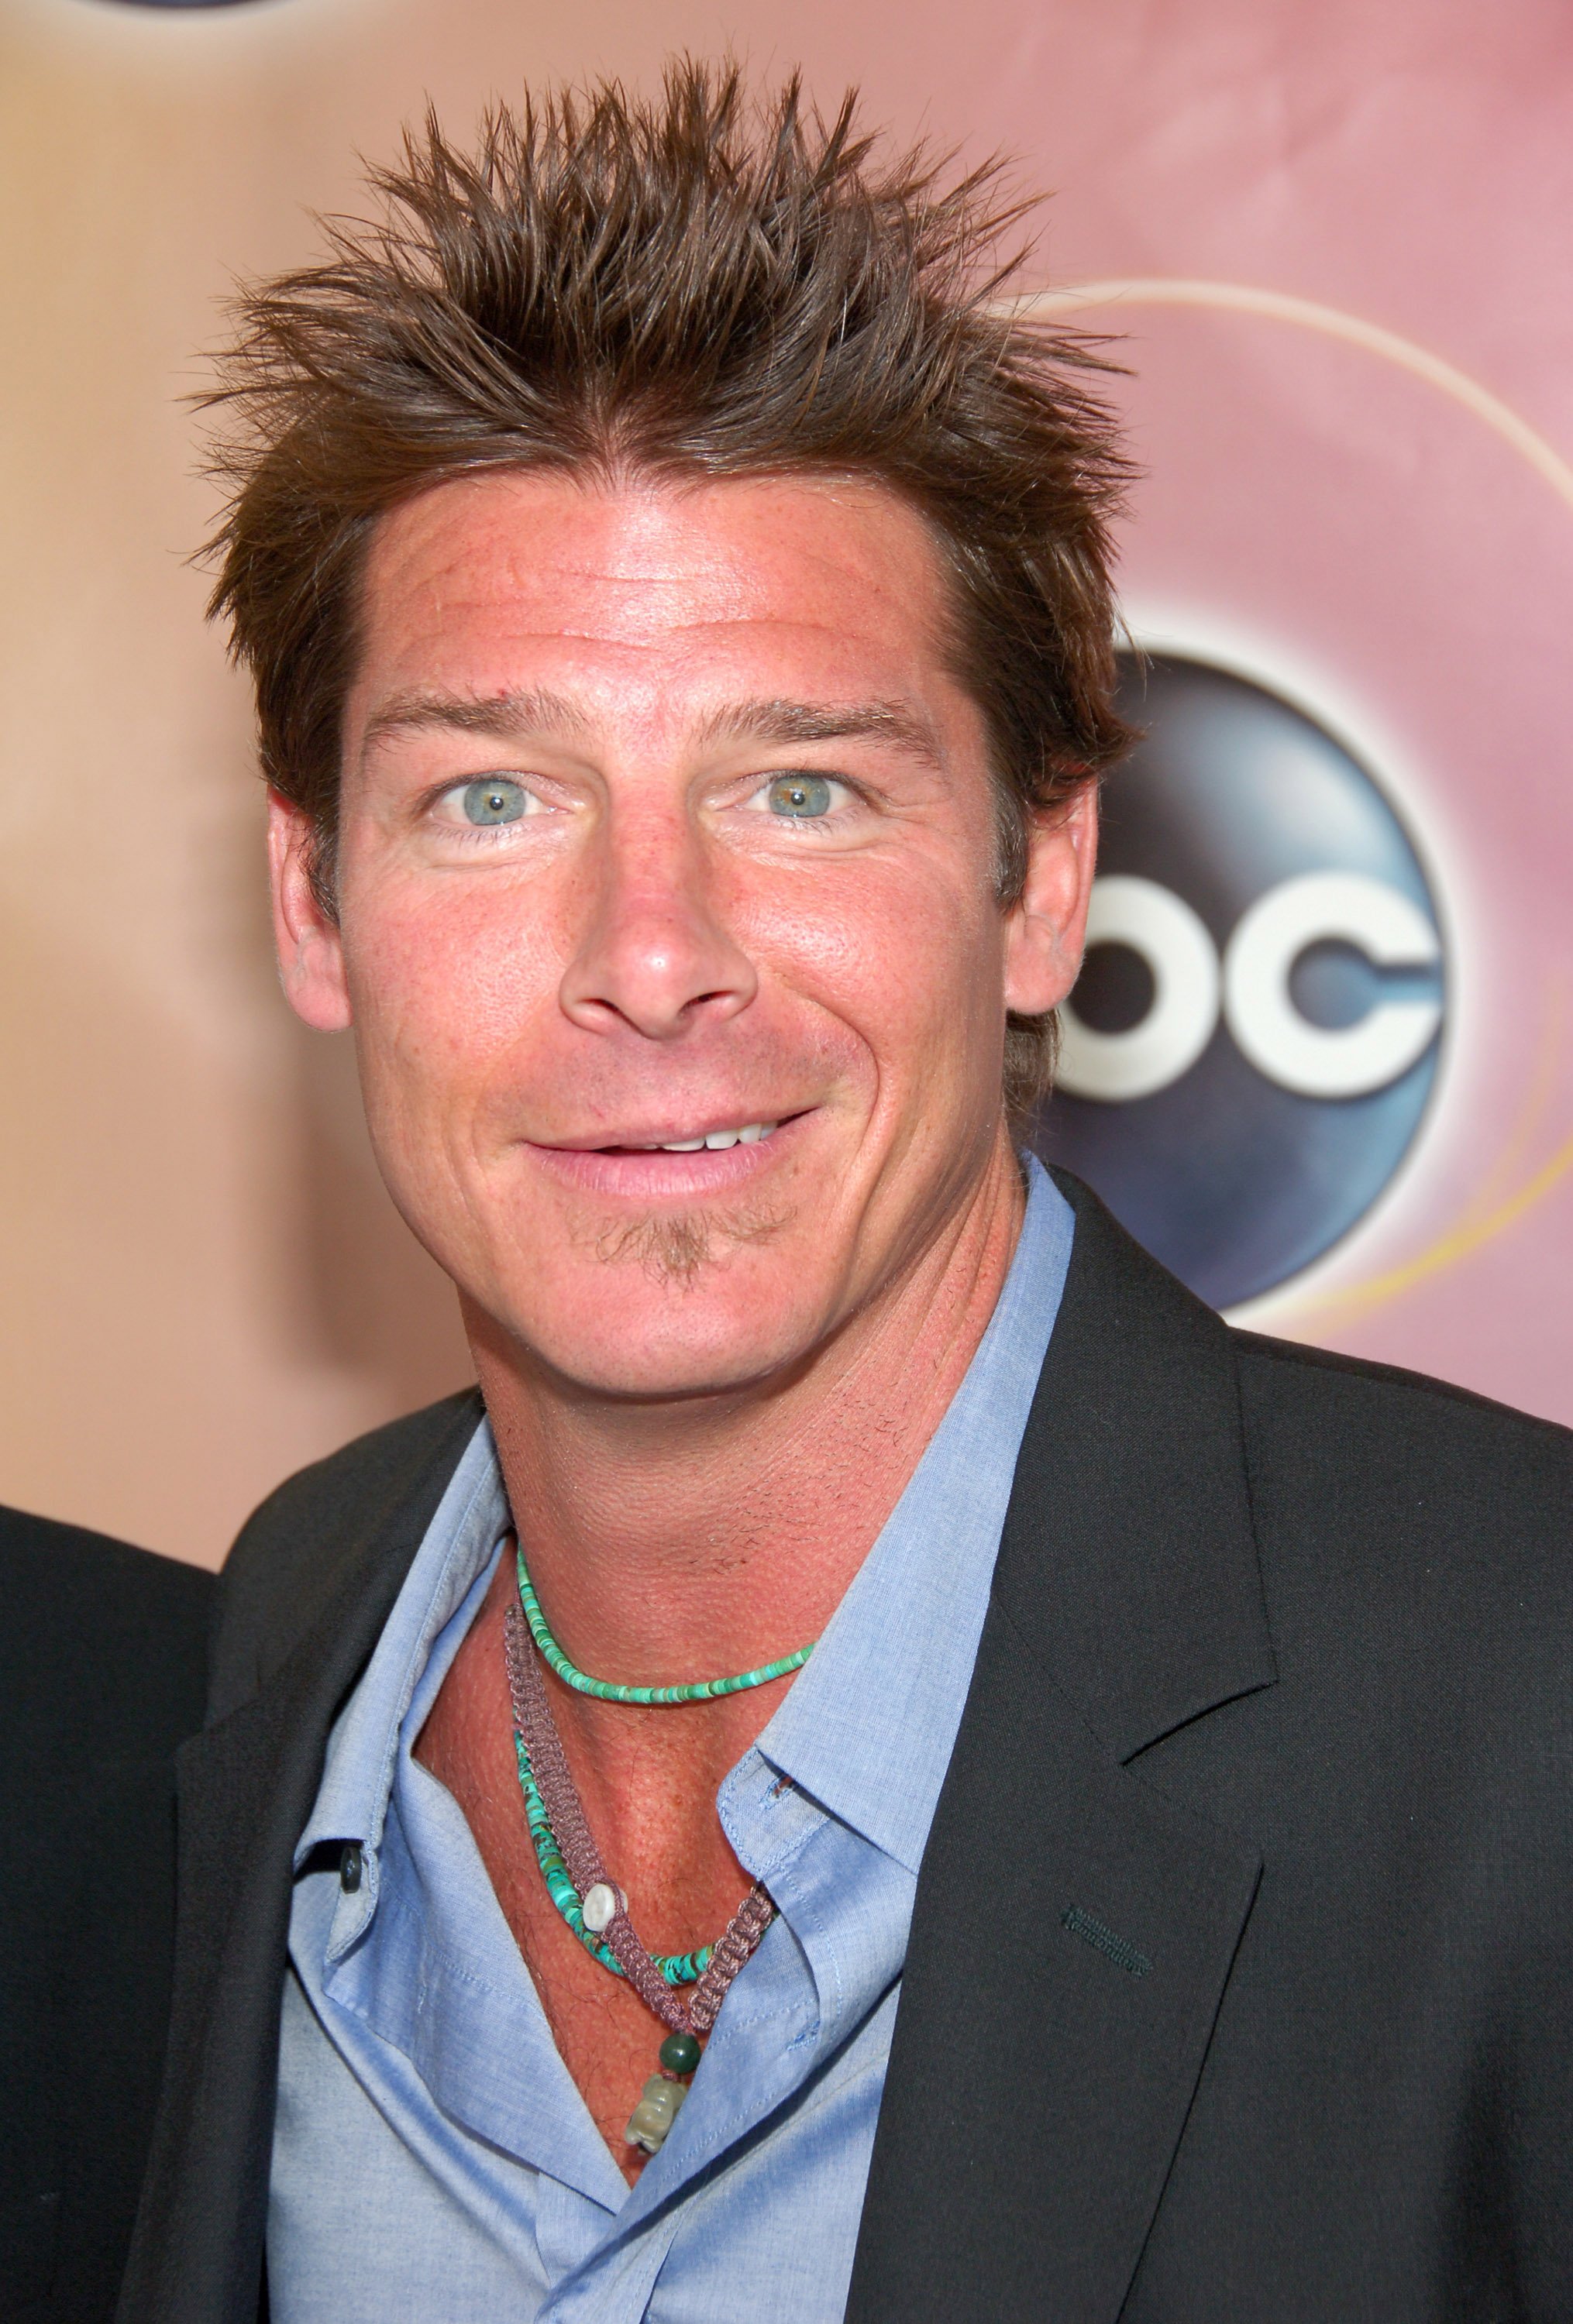 Ty Pennington during the ABC Upfront 2006/2007 arrivals at Lincoln Center in New York City, New York on  May 16, 2006 | Photo: Michael Loccisano/FilmMagic/Getty Images